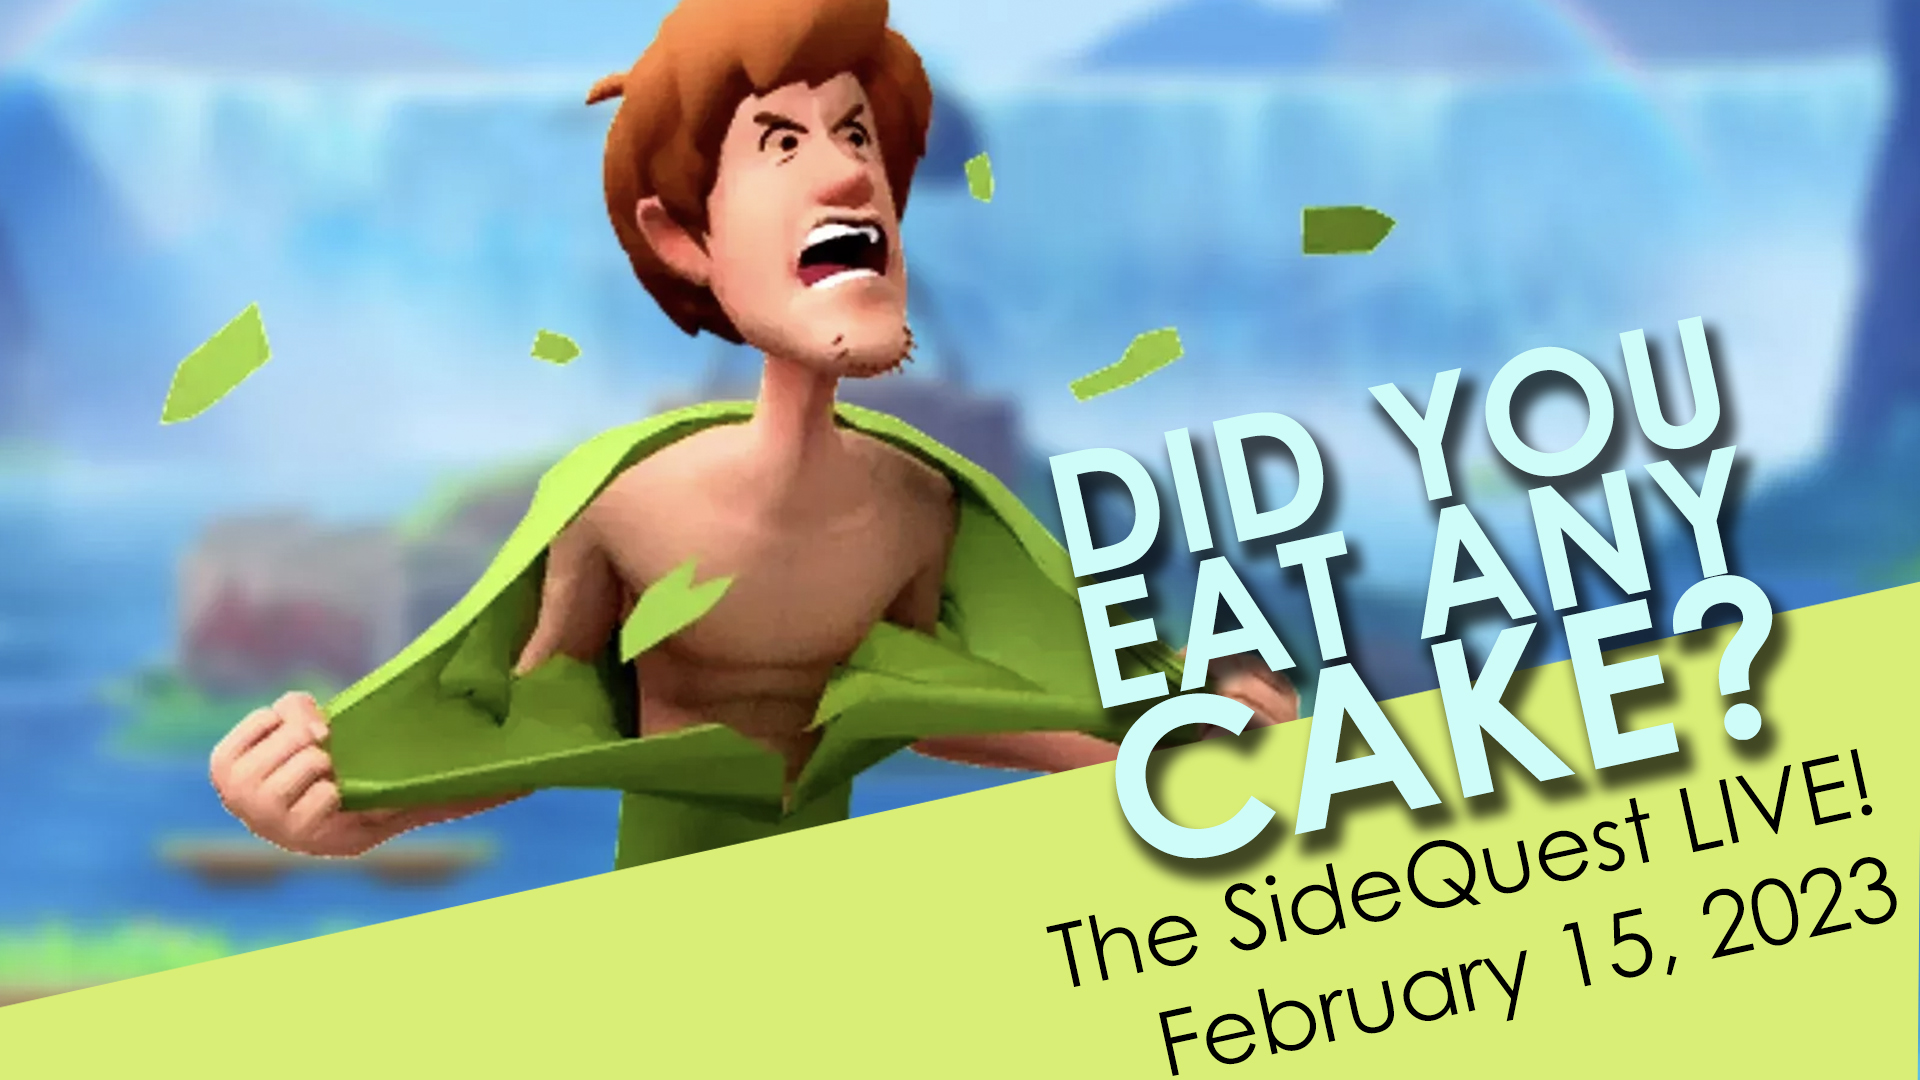 The SideQuest LIVE! February 15, 2023: Did you eat any cake?